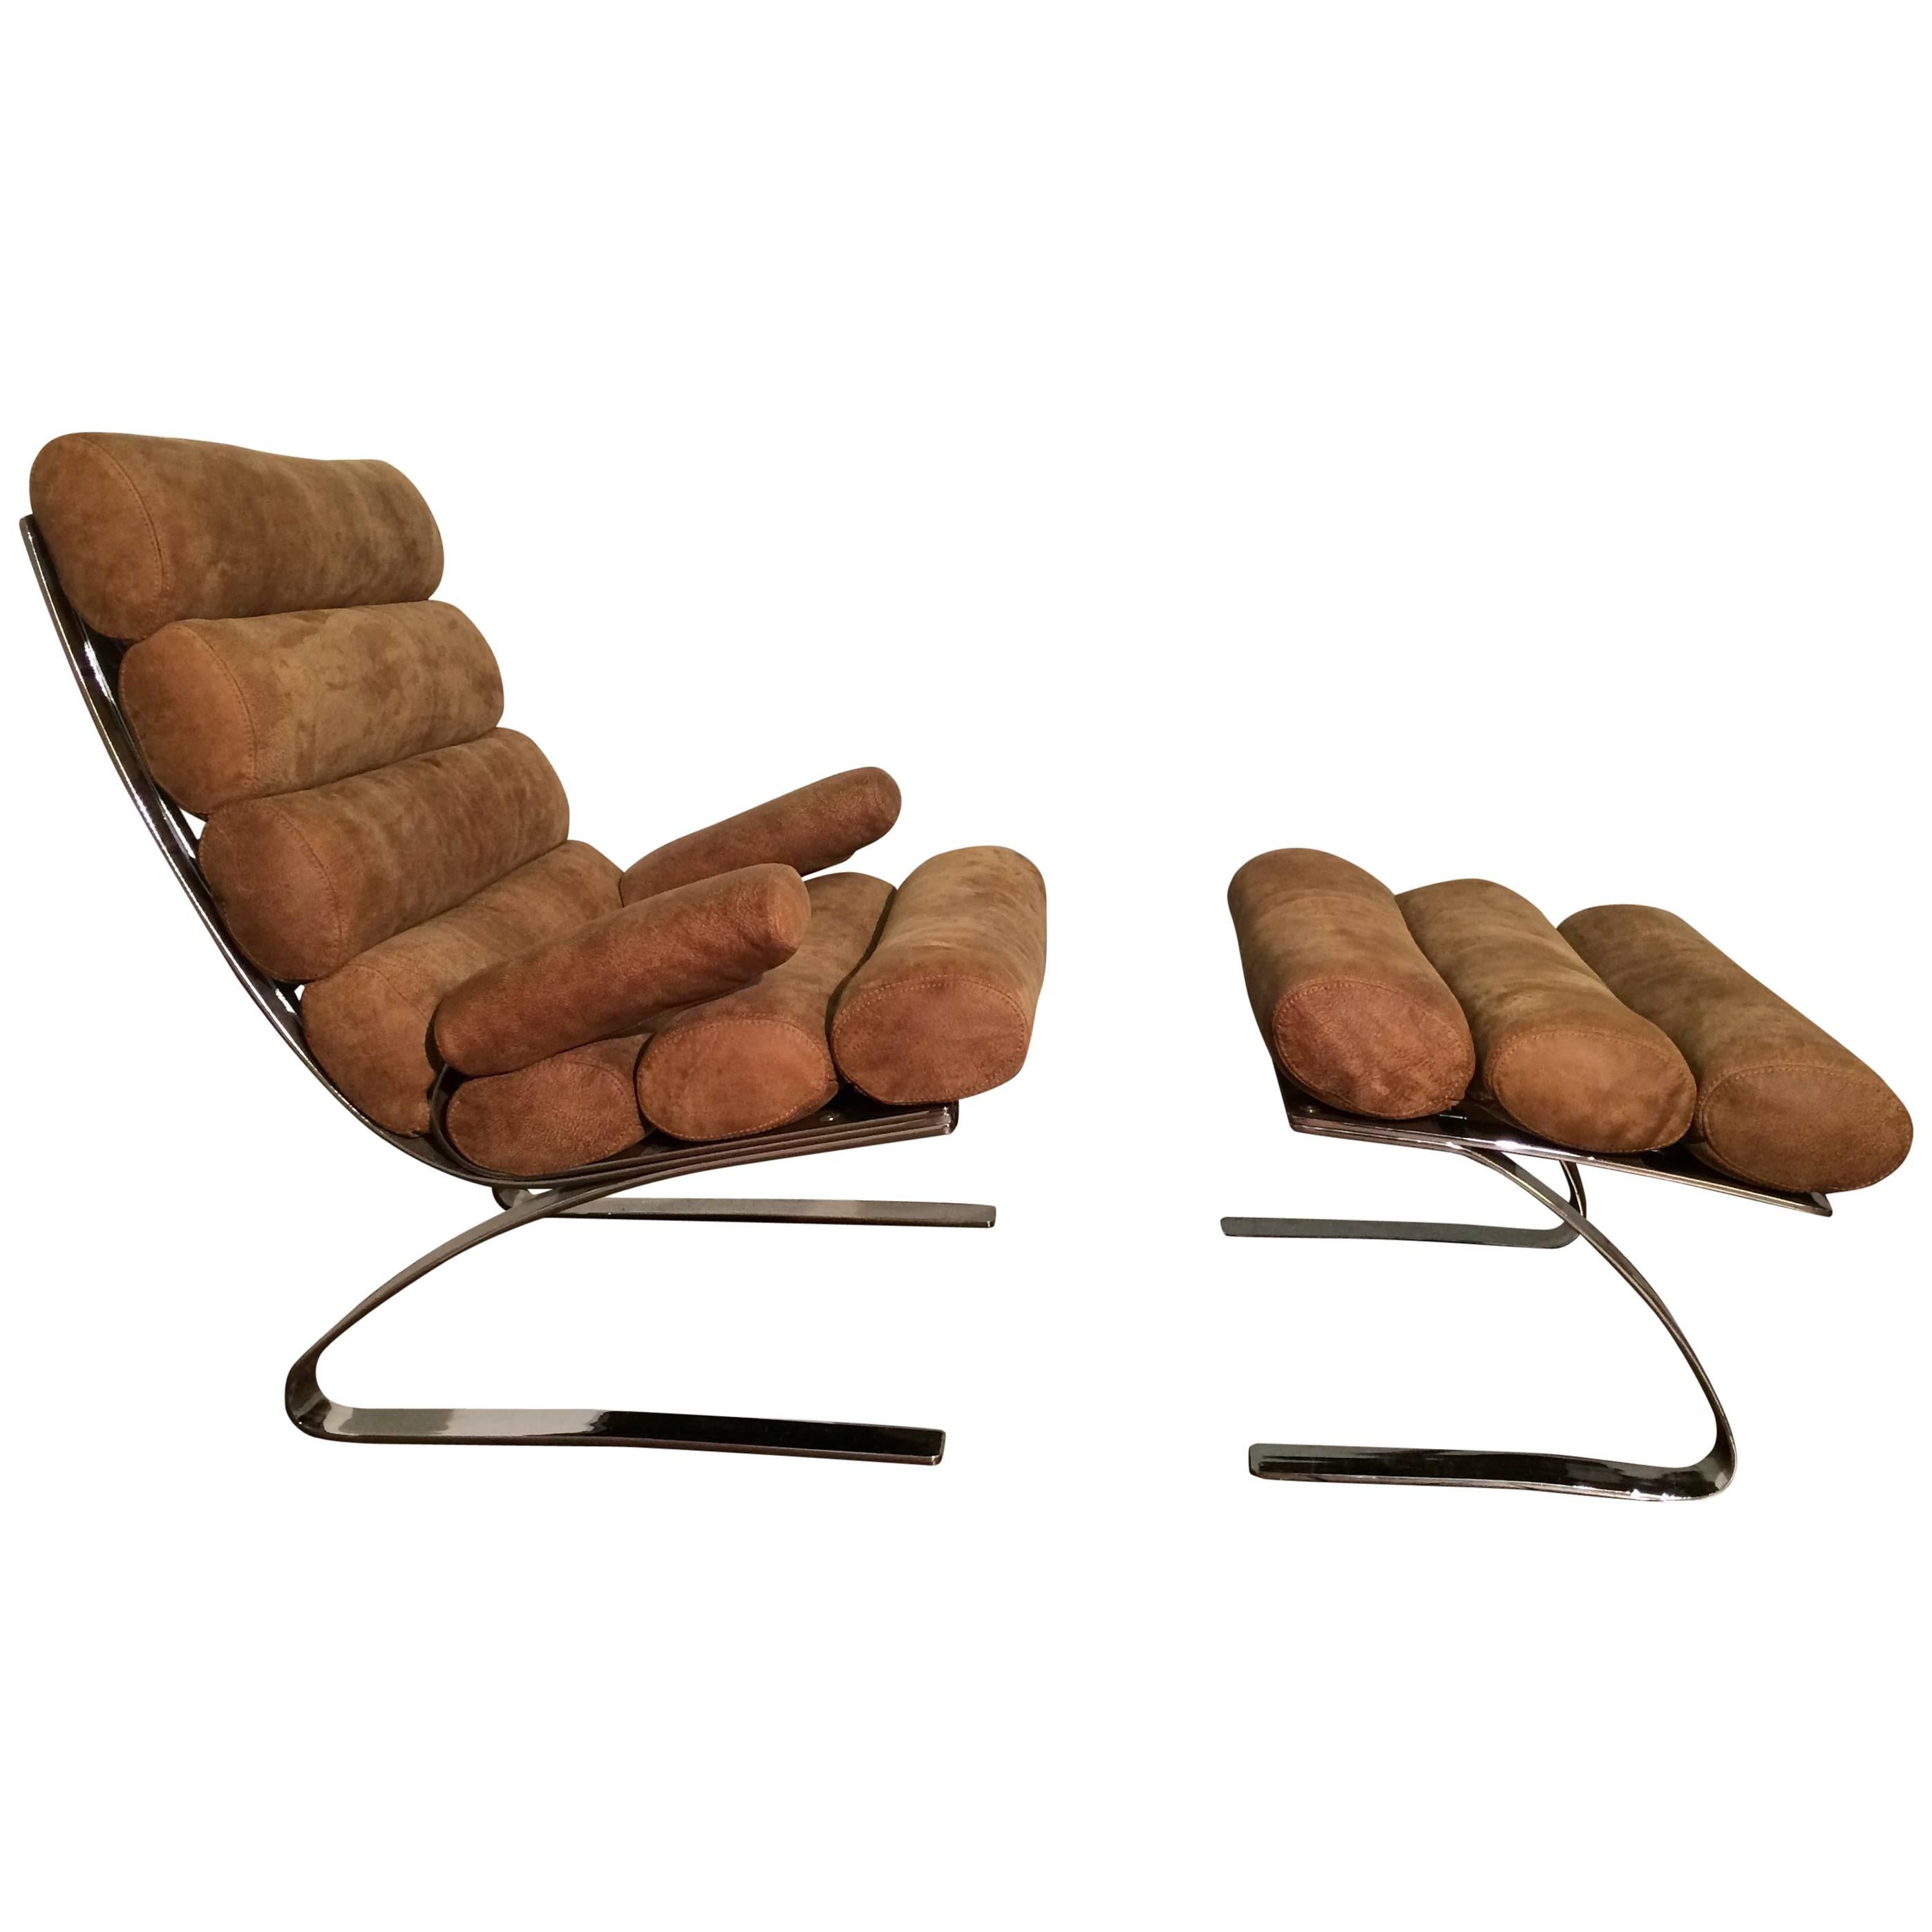 Vintage Sinus Lounge Chair and Pouffe by Reinhold Adolf and Hans-Jürgen Schräpfe For Sale